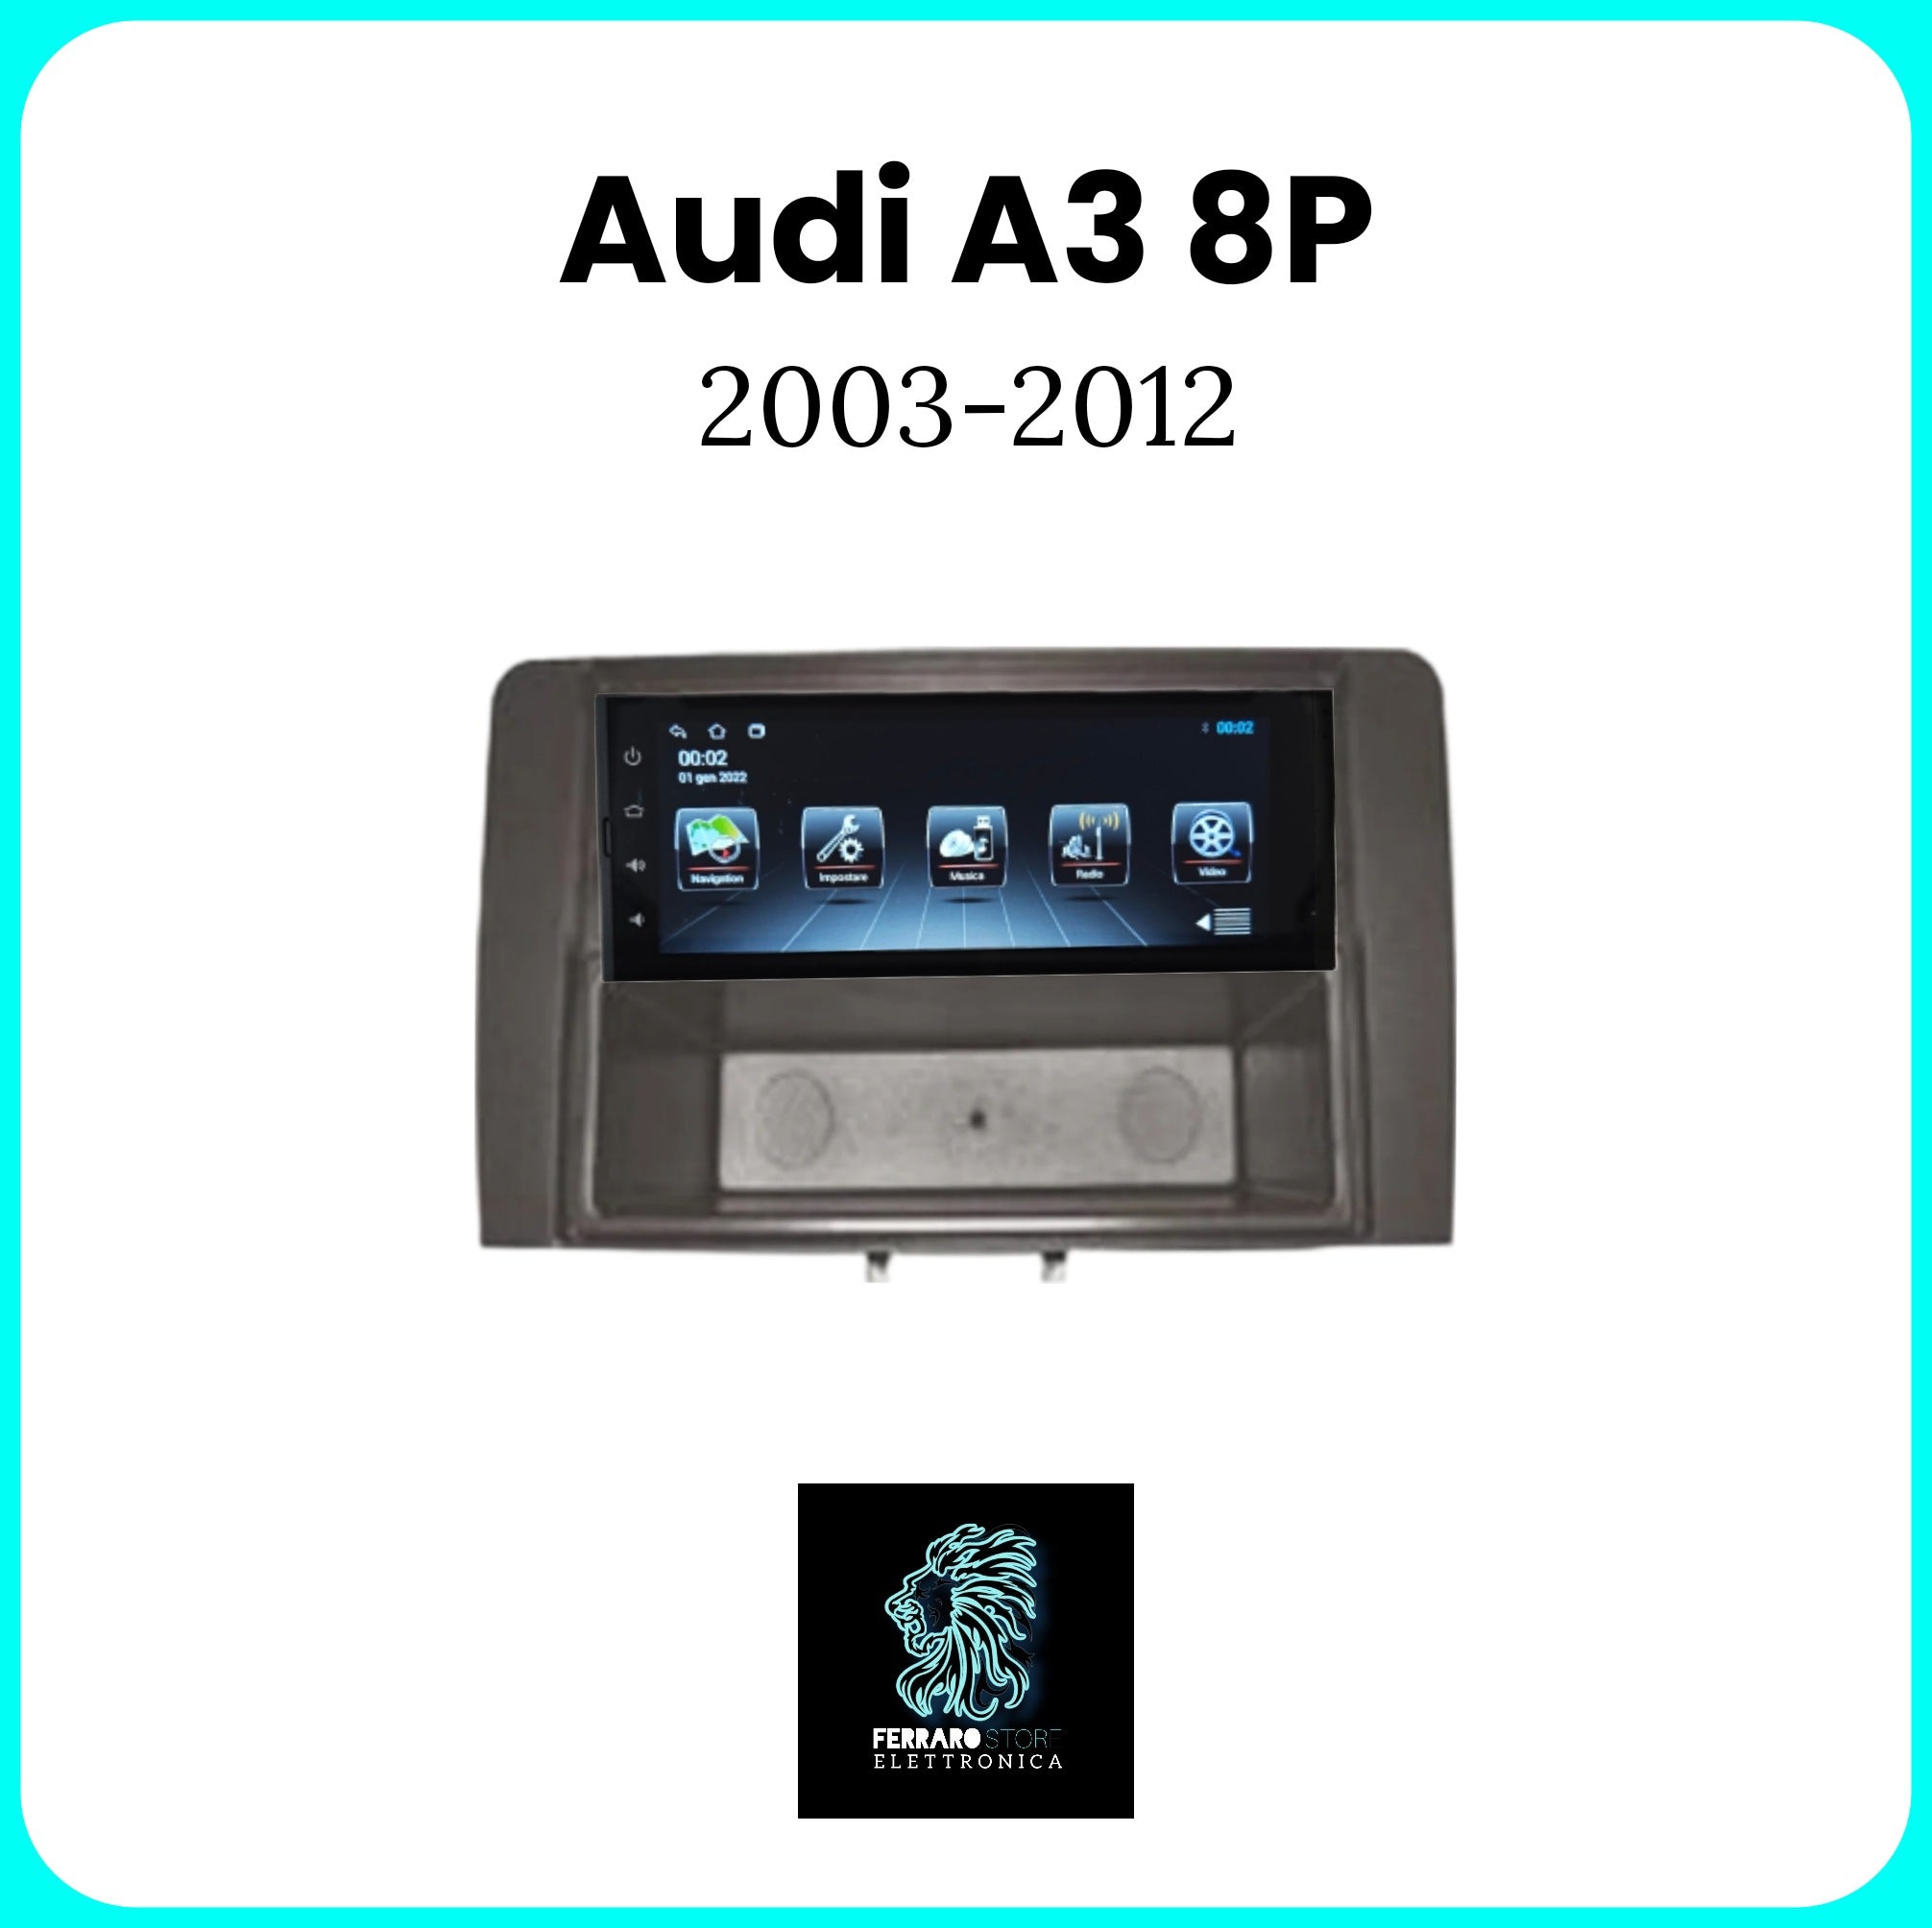 Autoradio per AUDI A3 8P [2003 - 2013] - 1Din 6.9"Pollici, Android, GPS, WiFi, Bluetooth, Youtube, Playstore, Radio, Playstore.